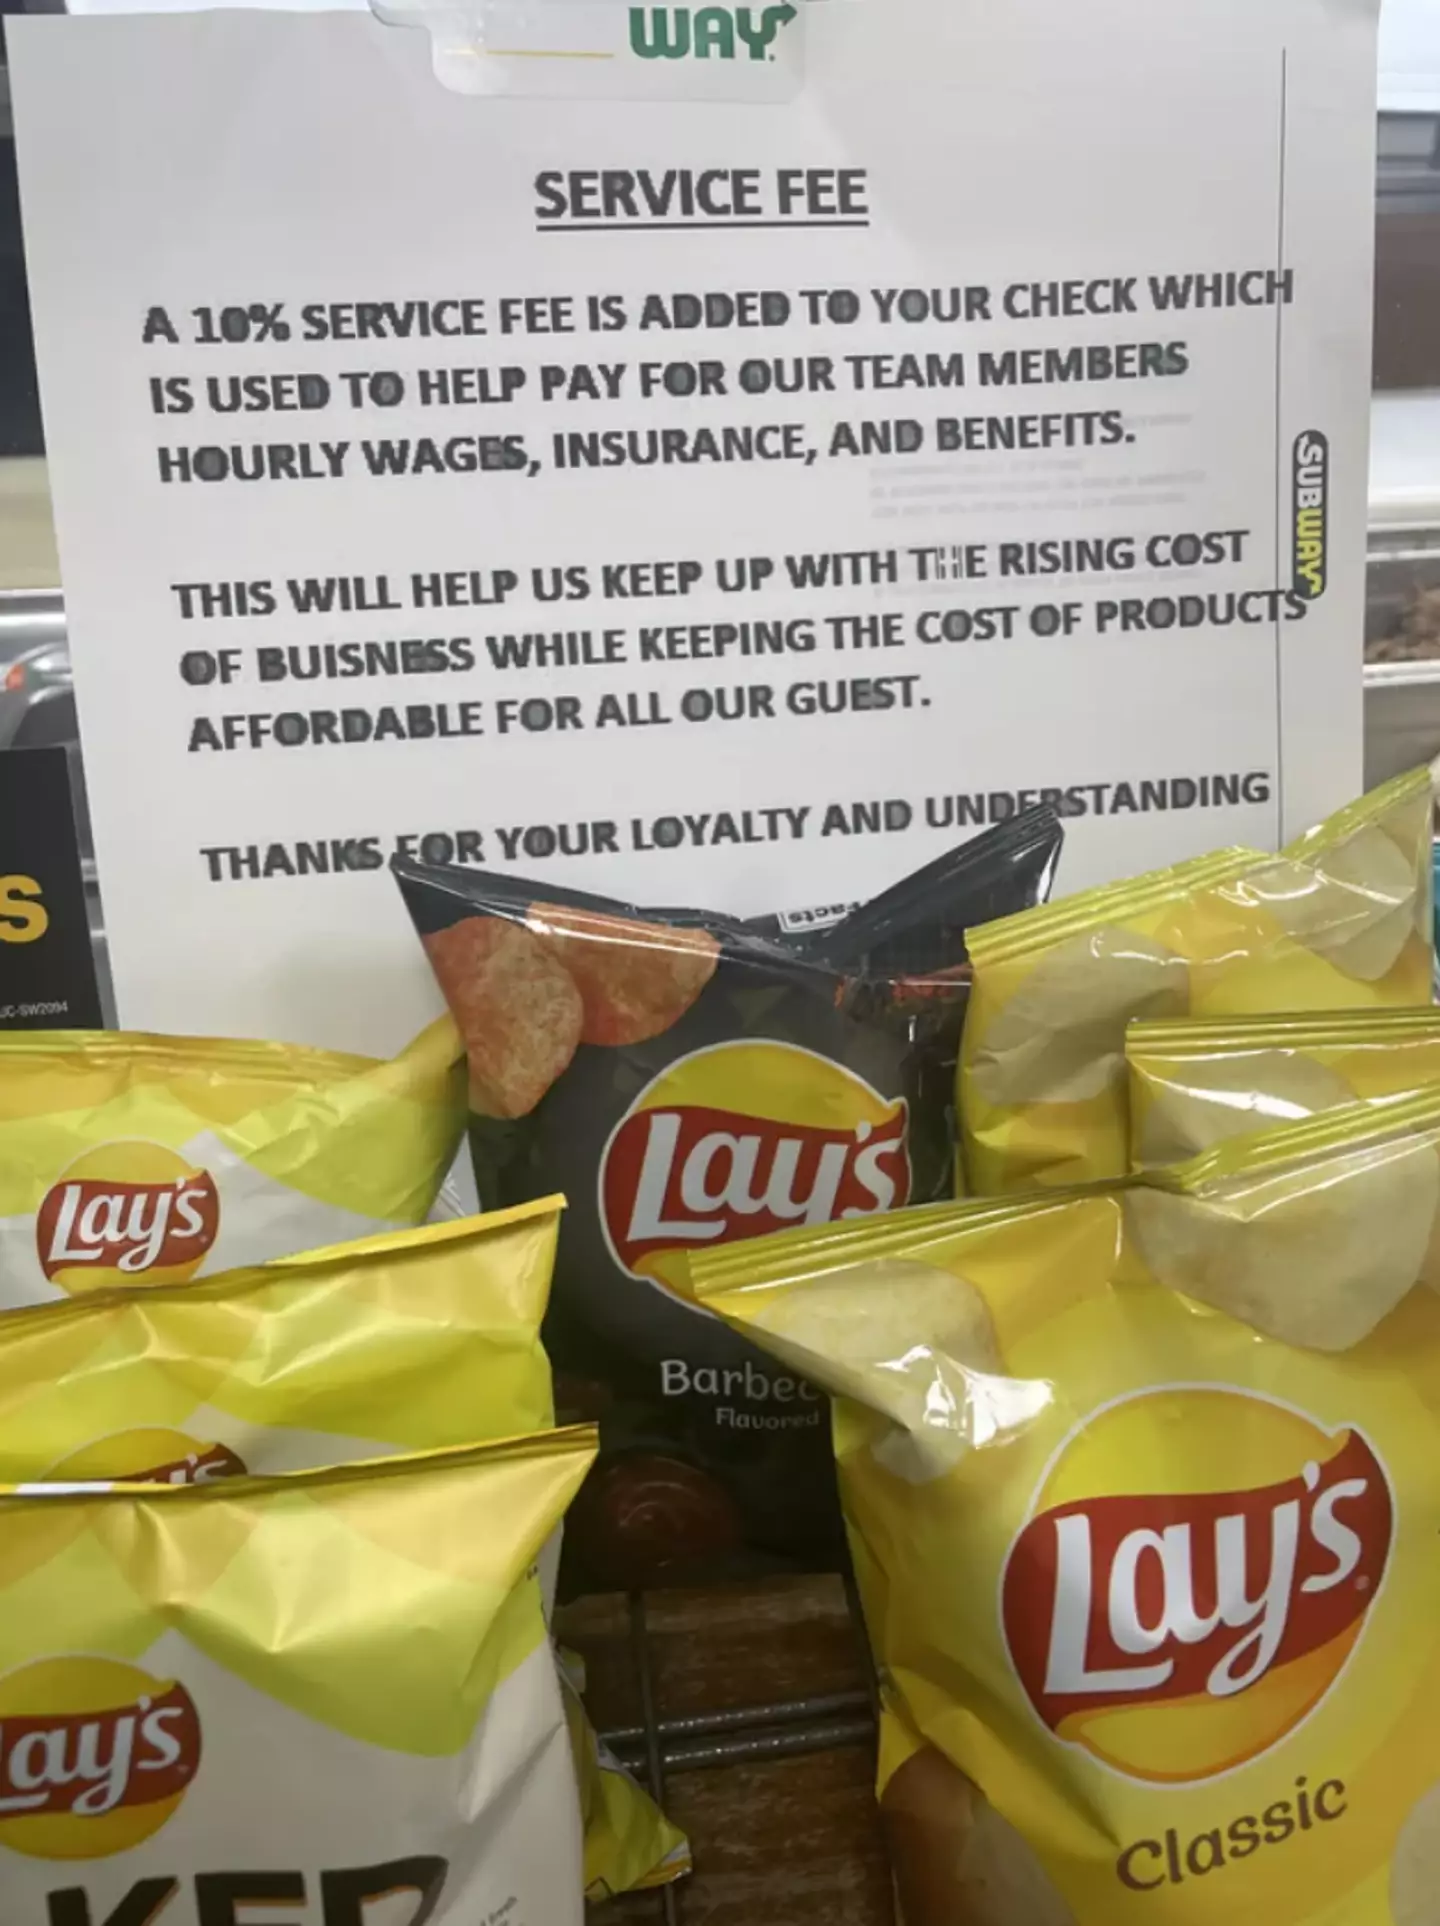 A Subway customer uploaded the controversial notice to social media.